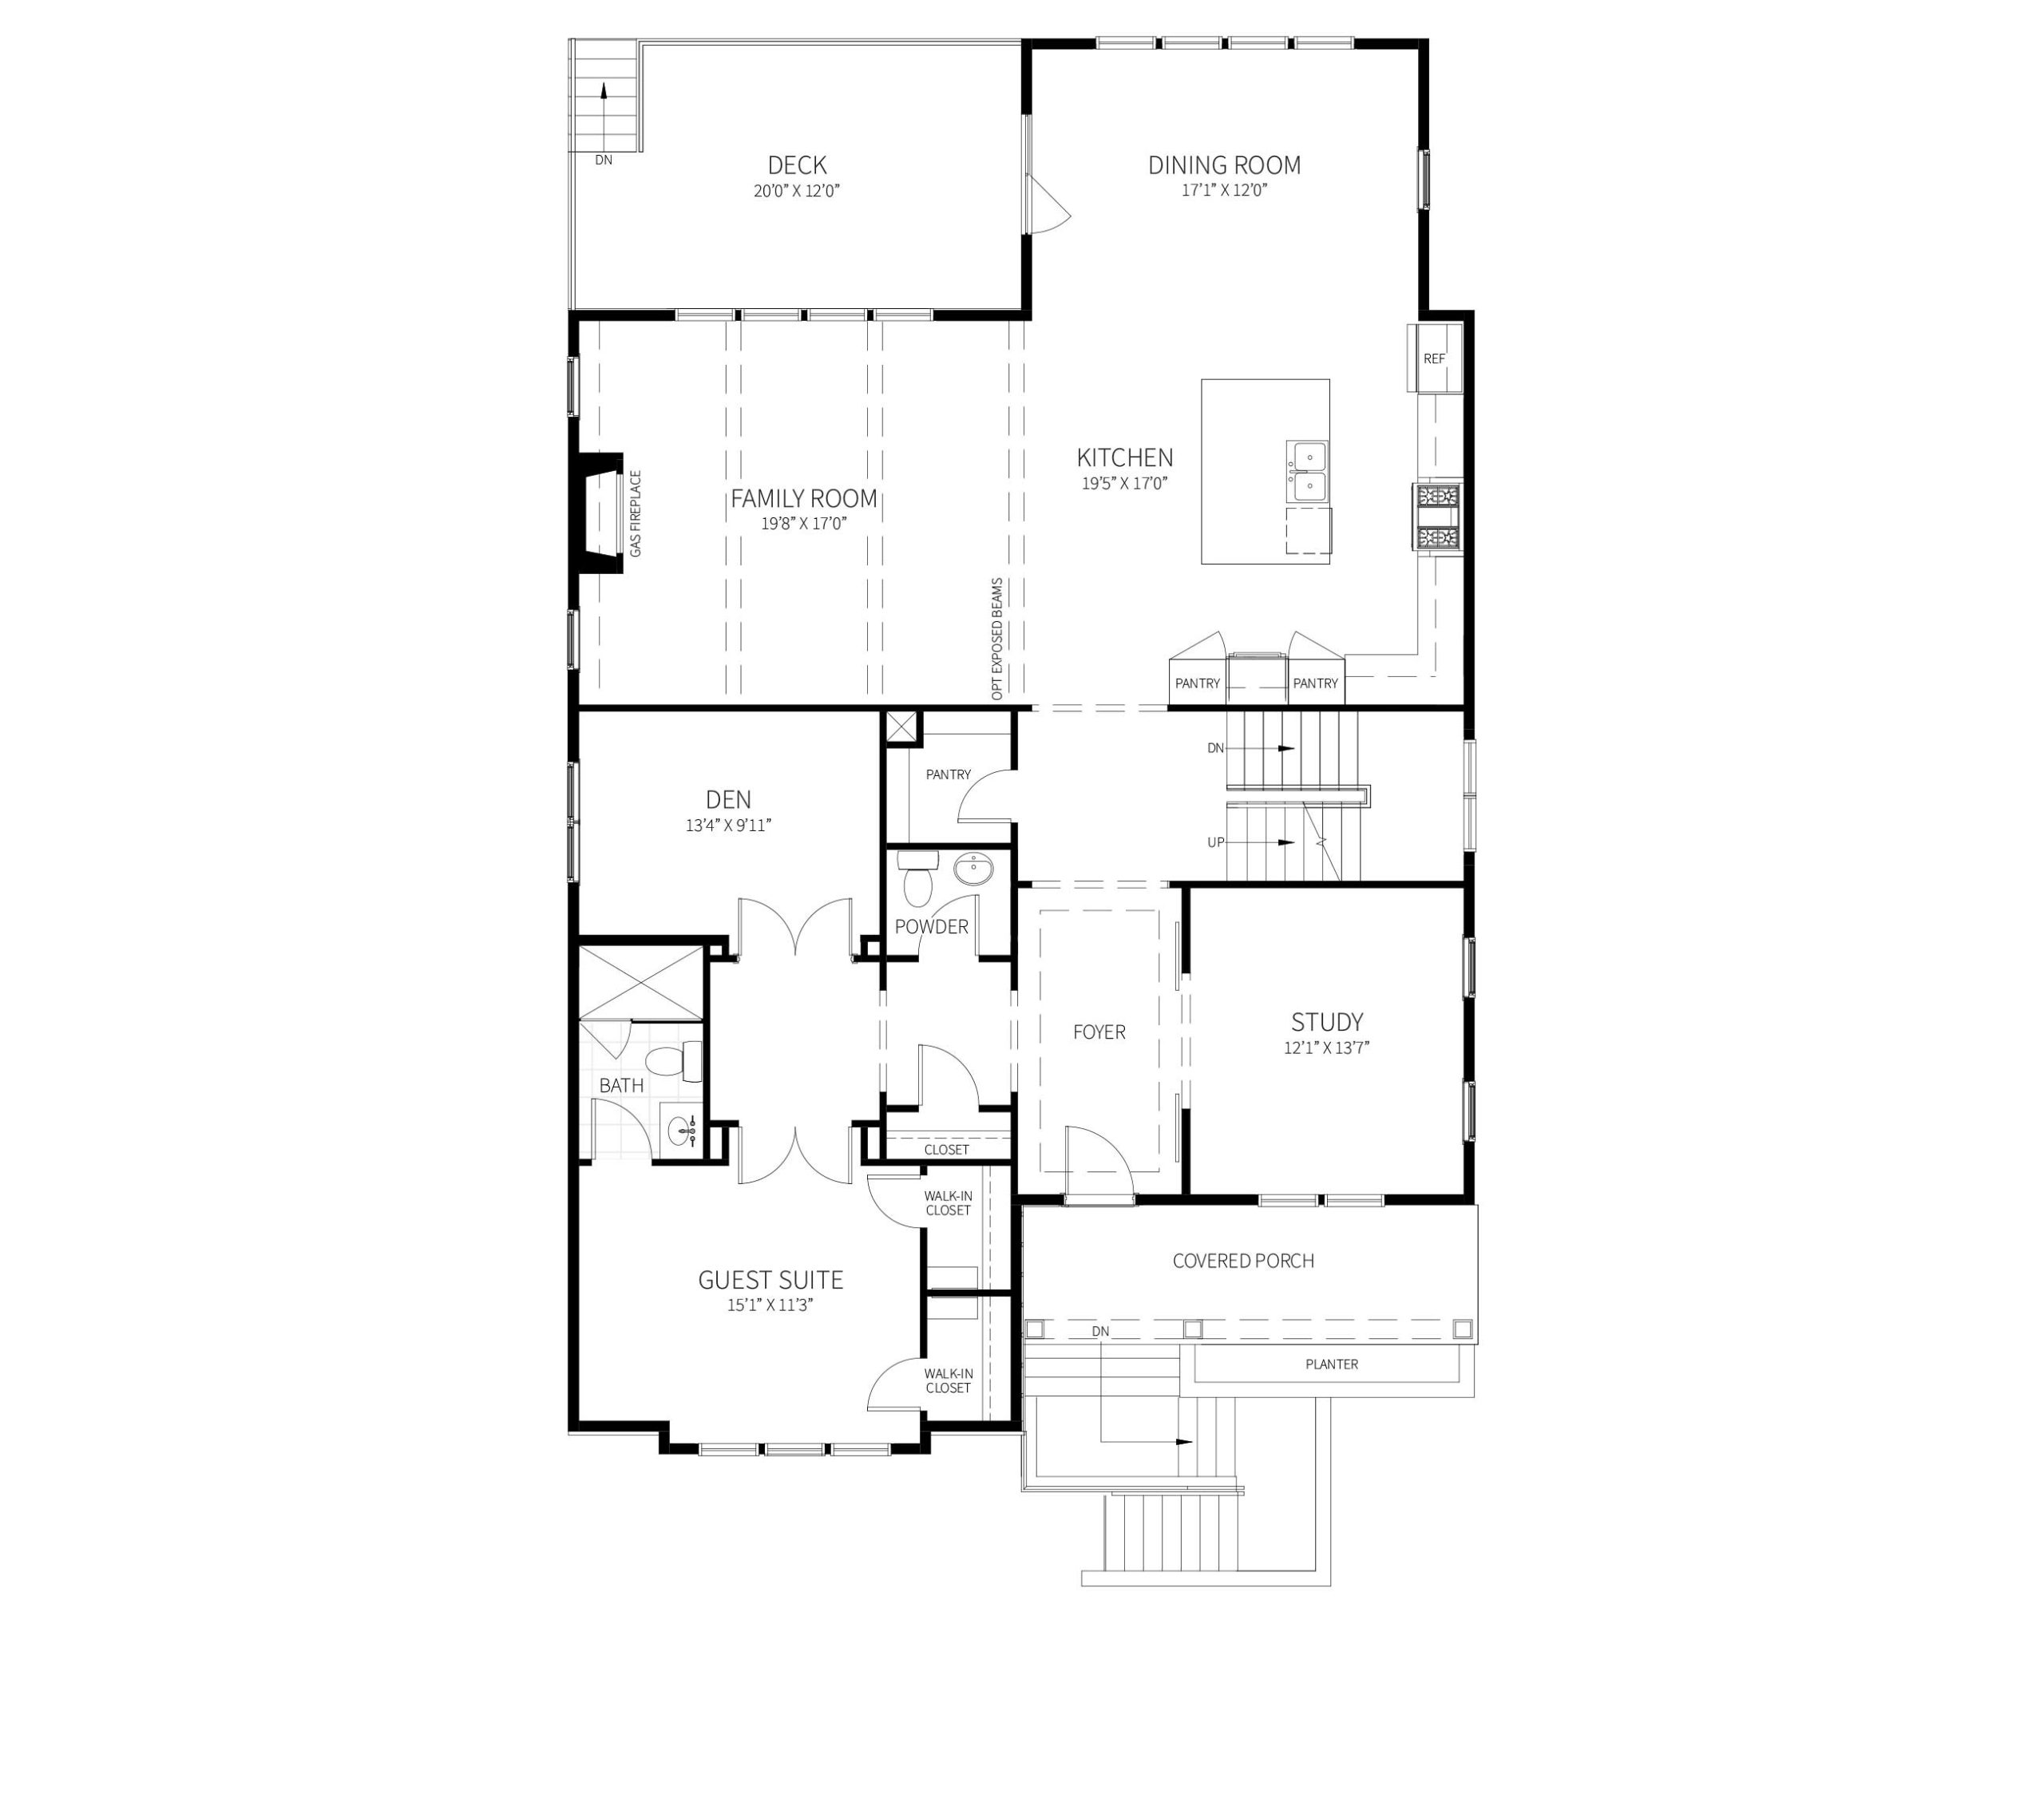 The main level plan for the proposed home, including Kitchen, Family Room and Guest Suite.